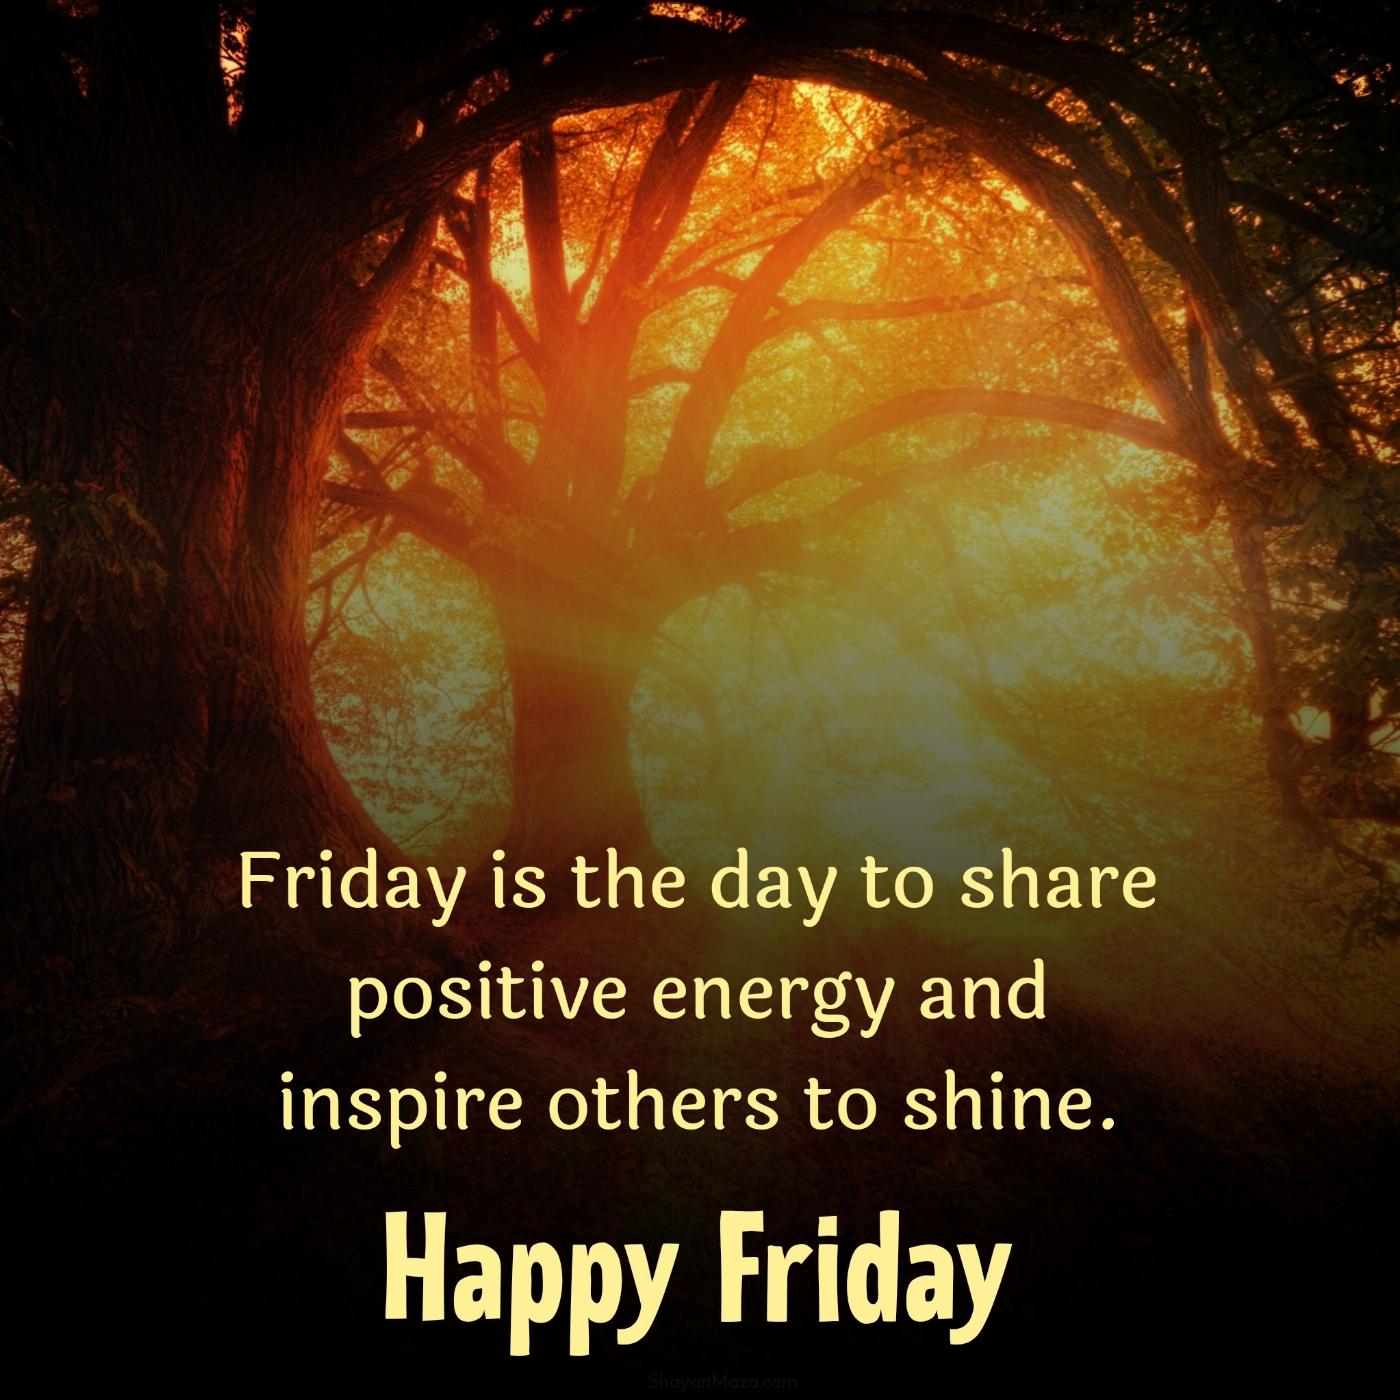 Friday is the day to share positive energy and inspire others to shine